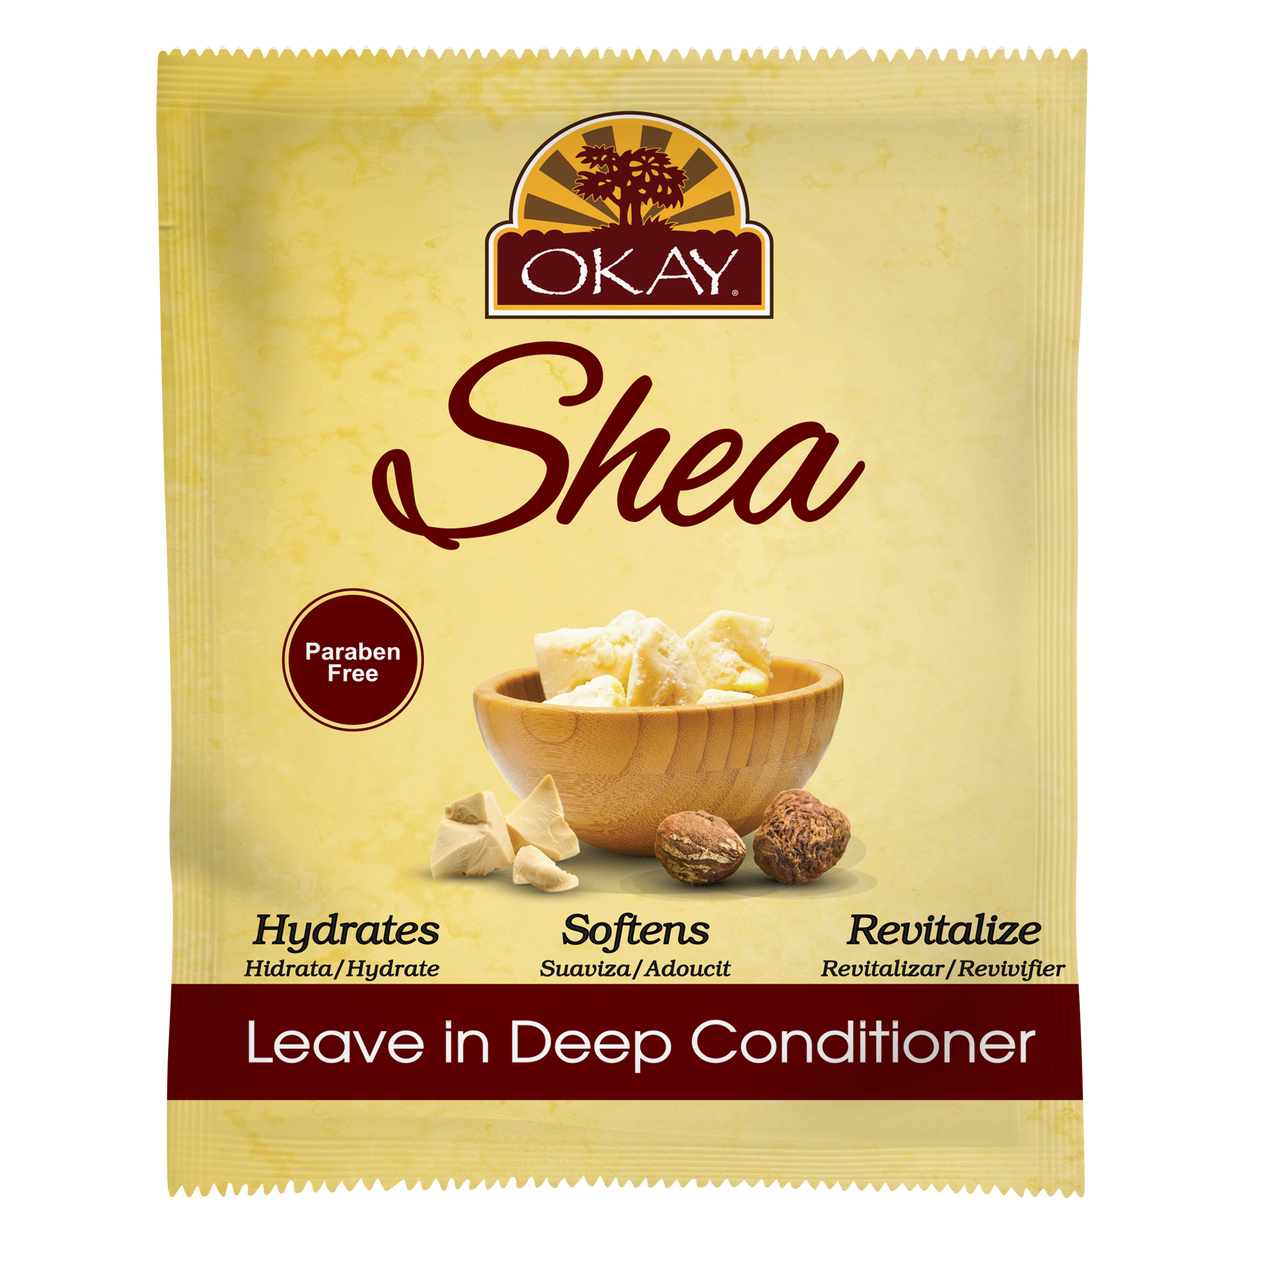 OKAY LEAVE-IN DEEP CONDITIONER PACKETTES 1.25 OZ